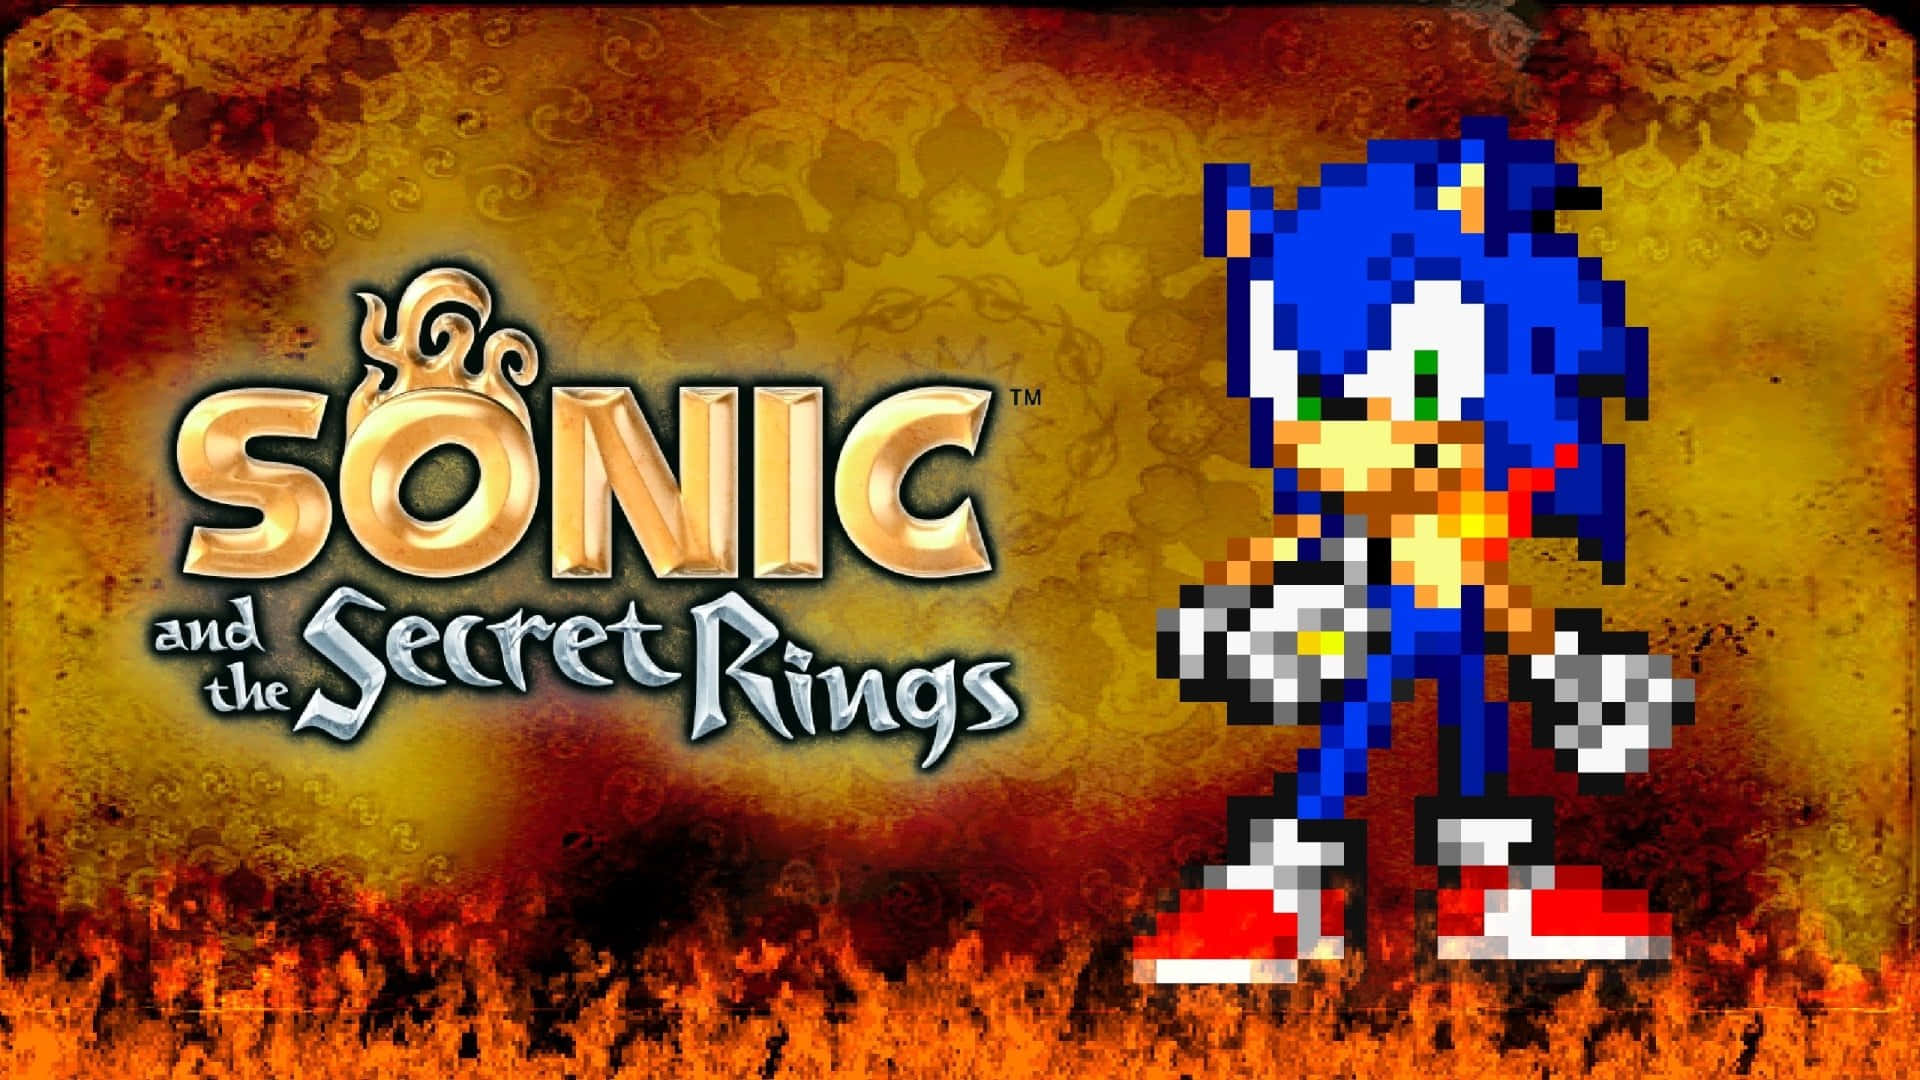 Sonic embarks on an exciting adventure in Sonic And The Secret Rings Wallpaper